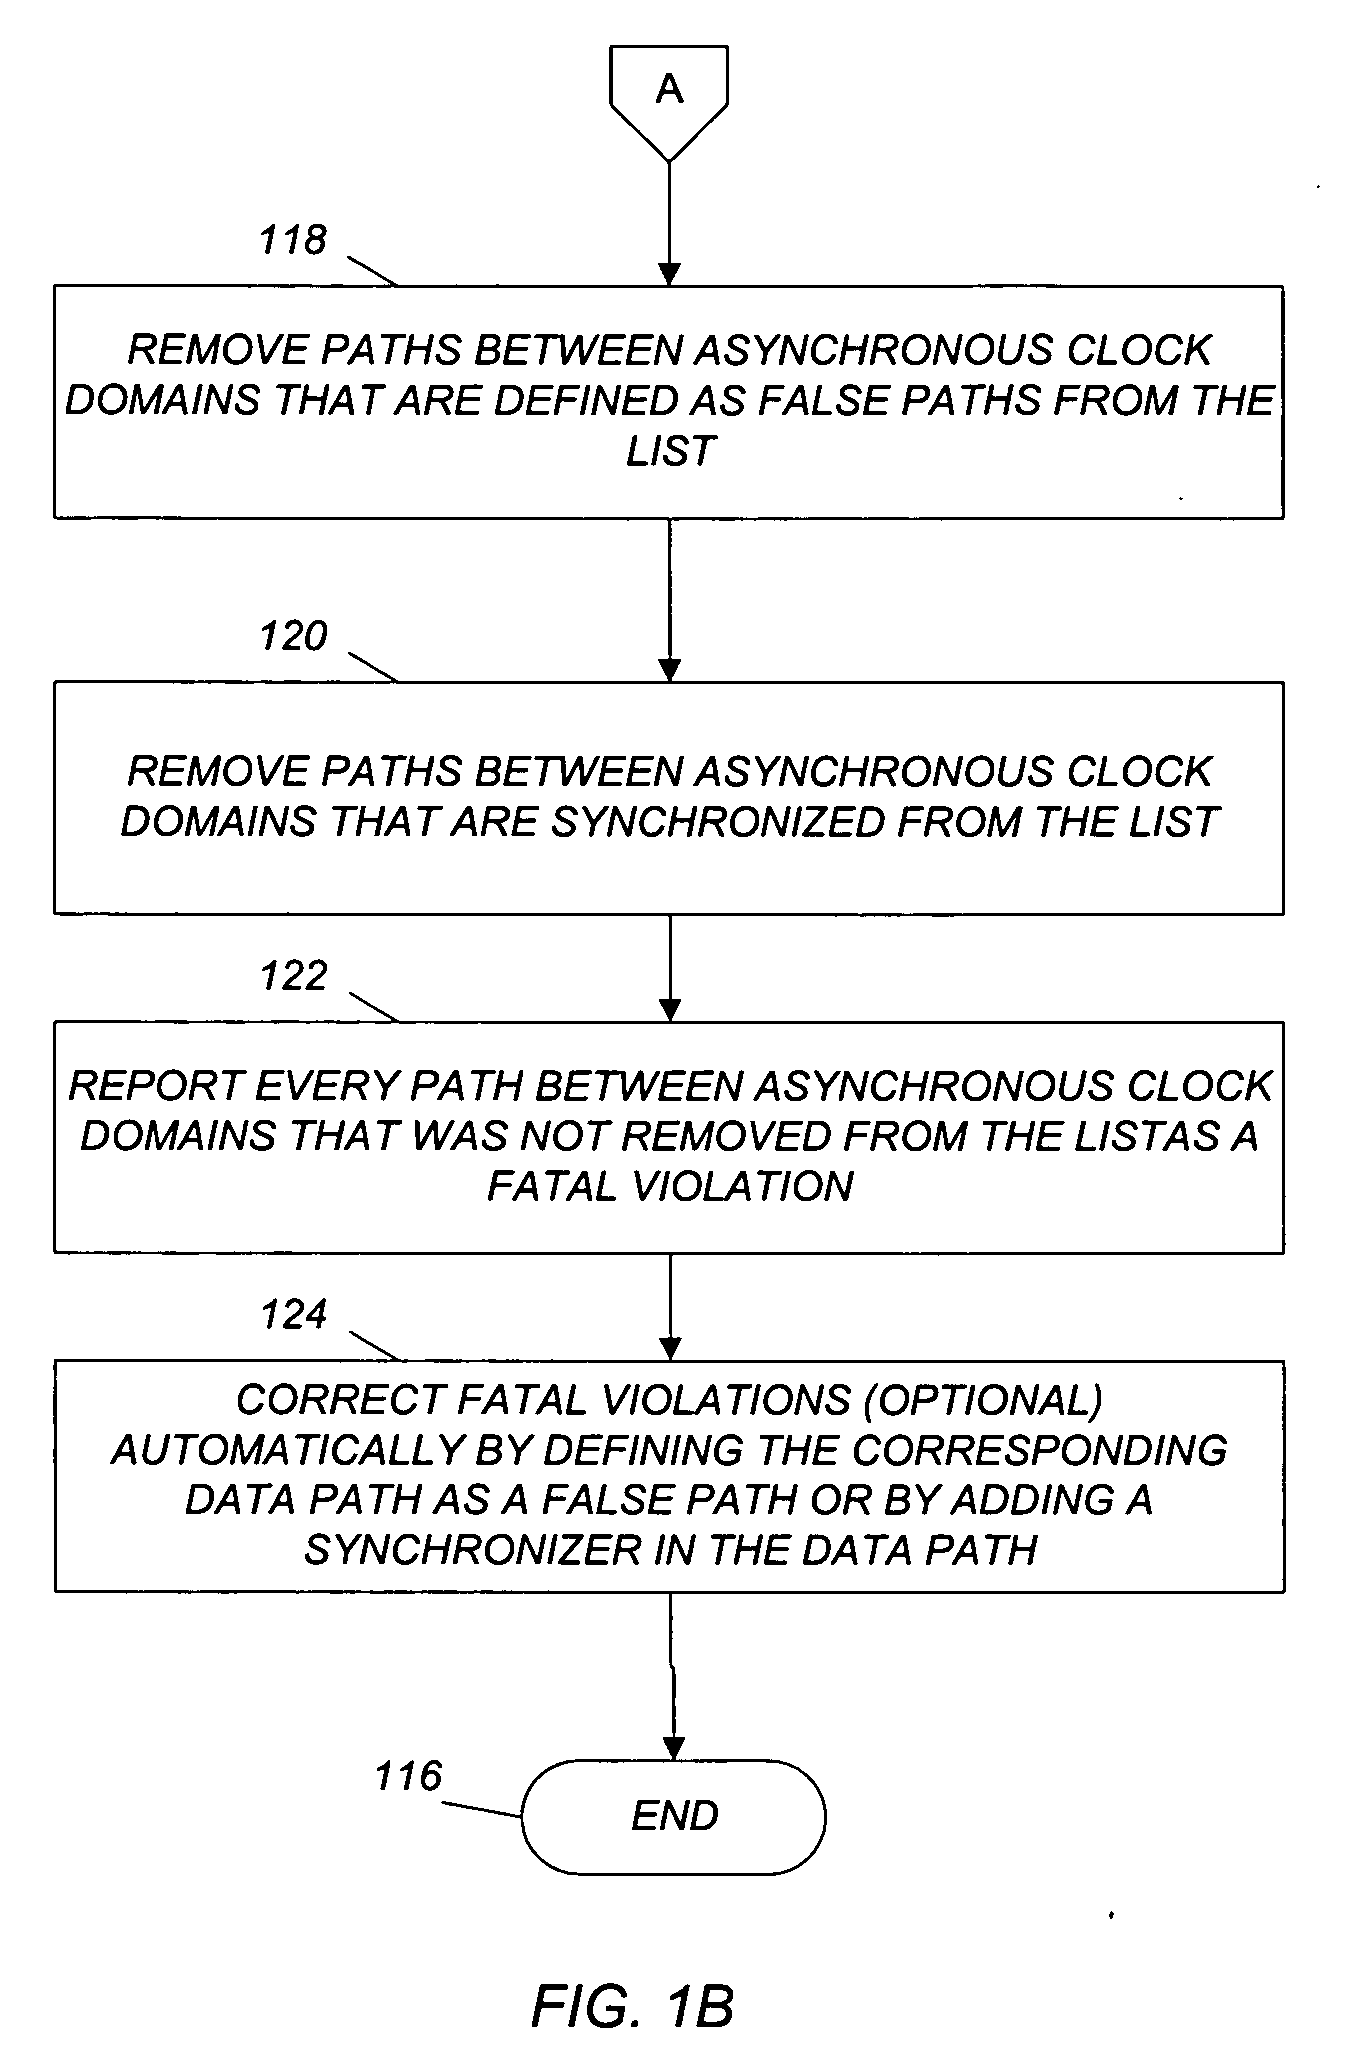 Method and computer program for management of synchronous and asynchronous clock domain crossing in integrated circuit design